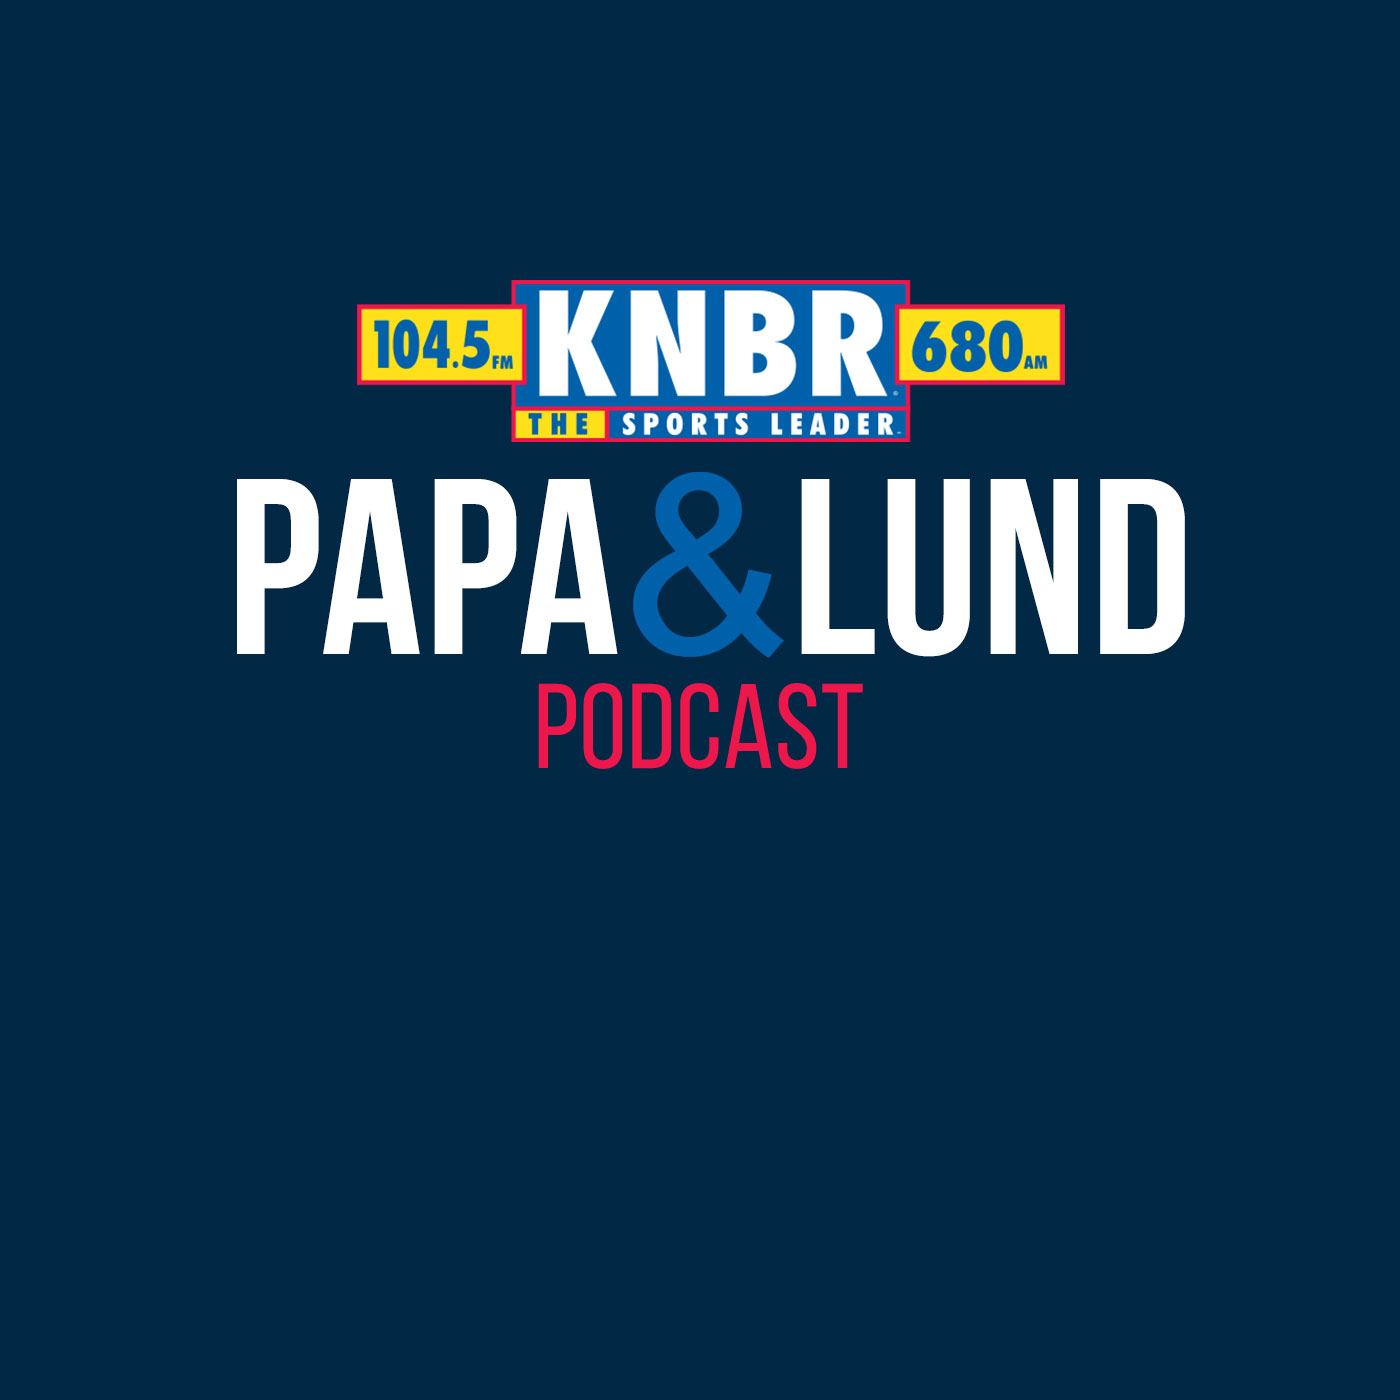 4-17 Papa & Lund Show - 12pm Hour - Papa & Lund discuss what the Warriors should do this offseason in order to maximize Steph Curry's playing window